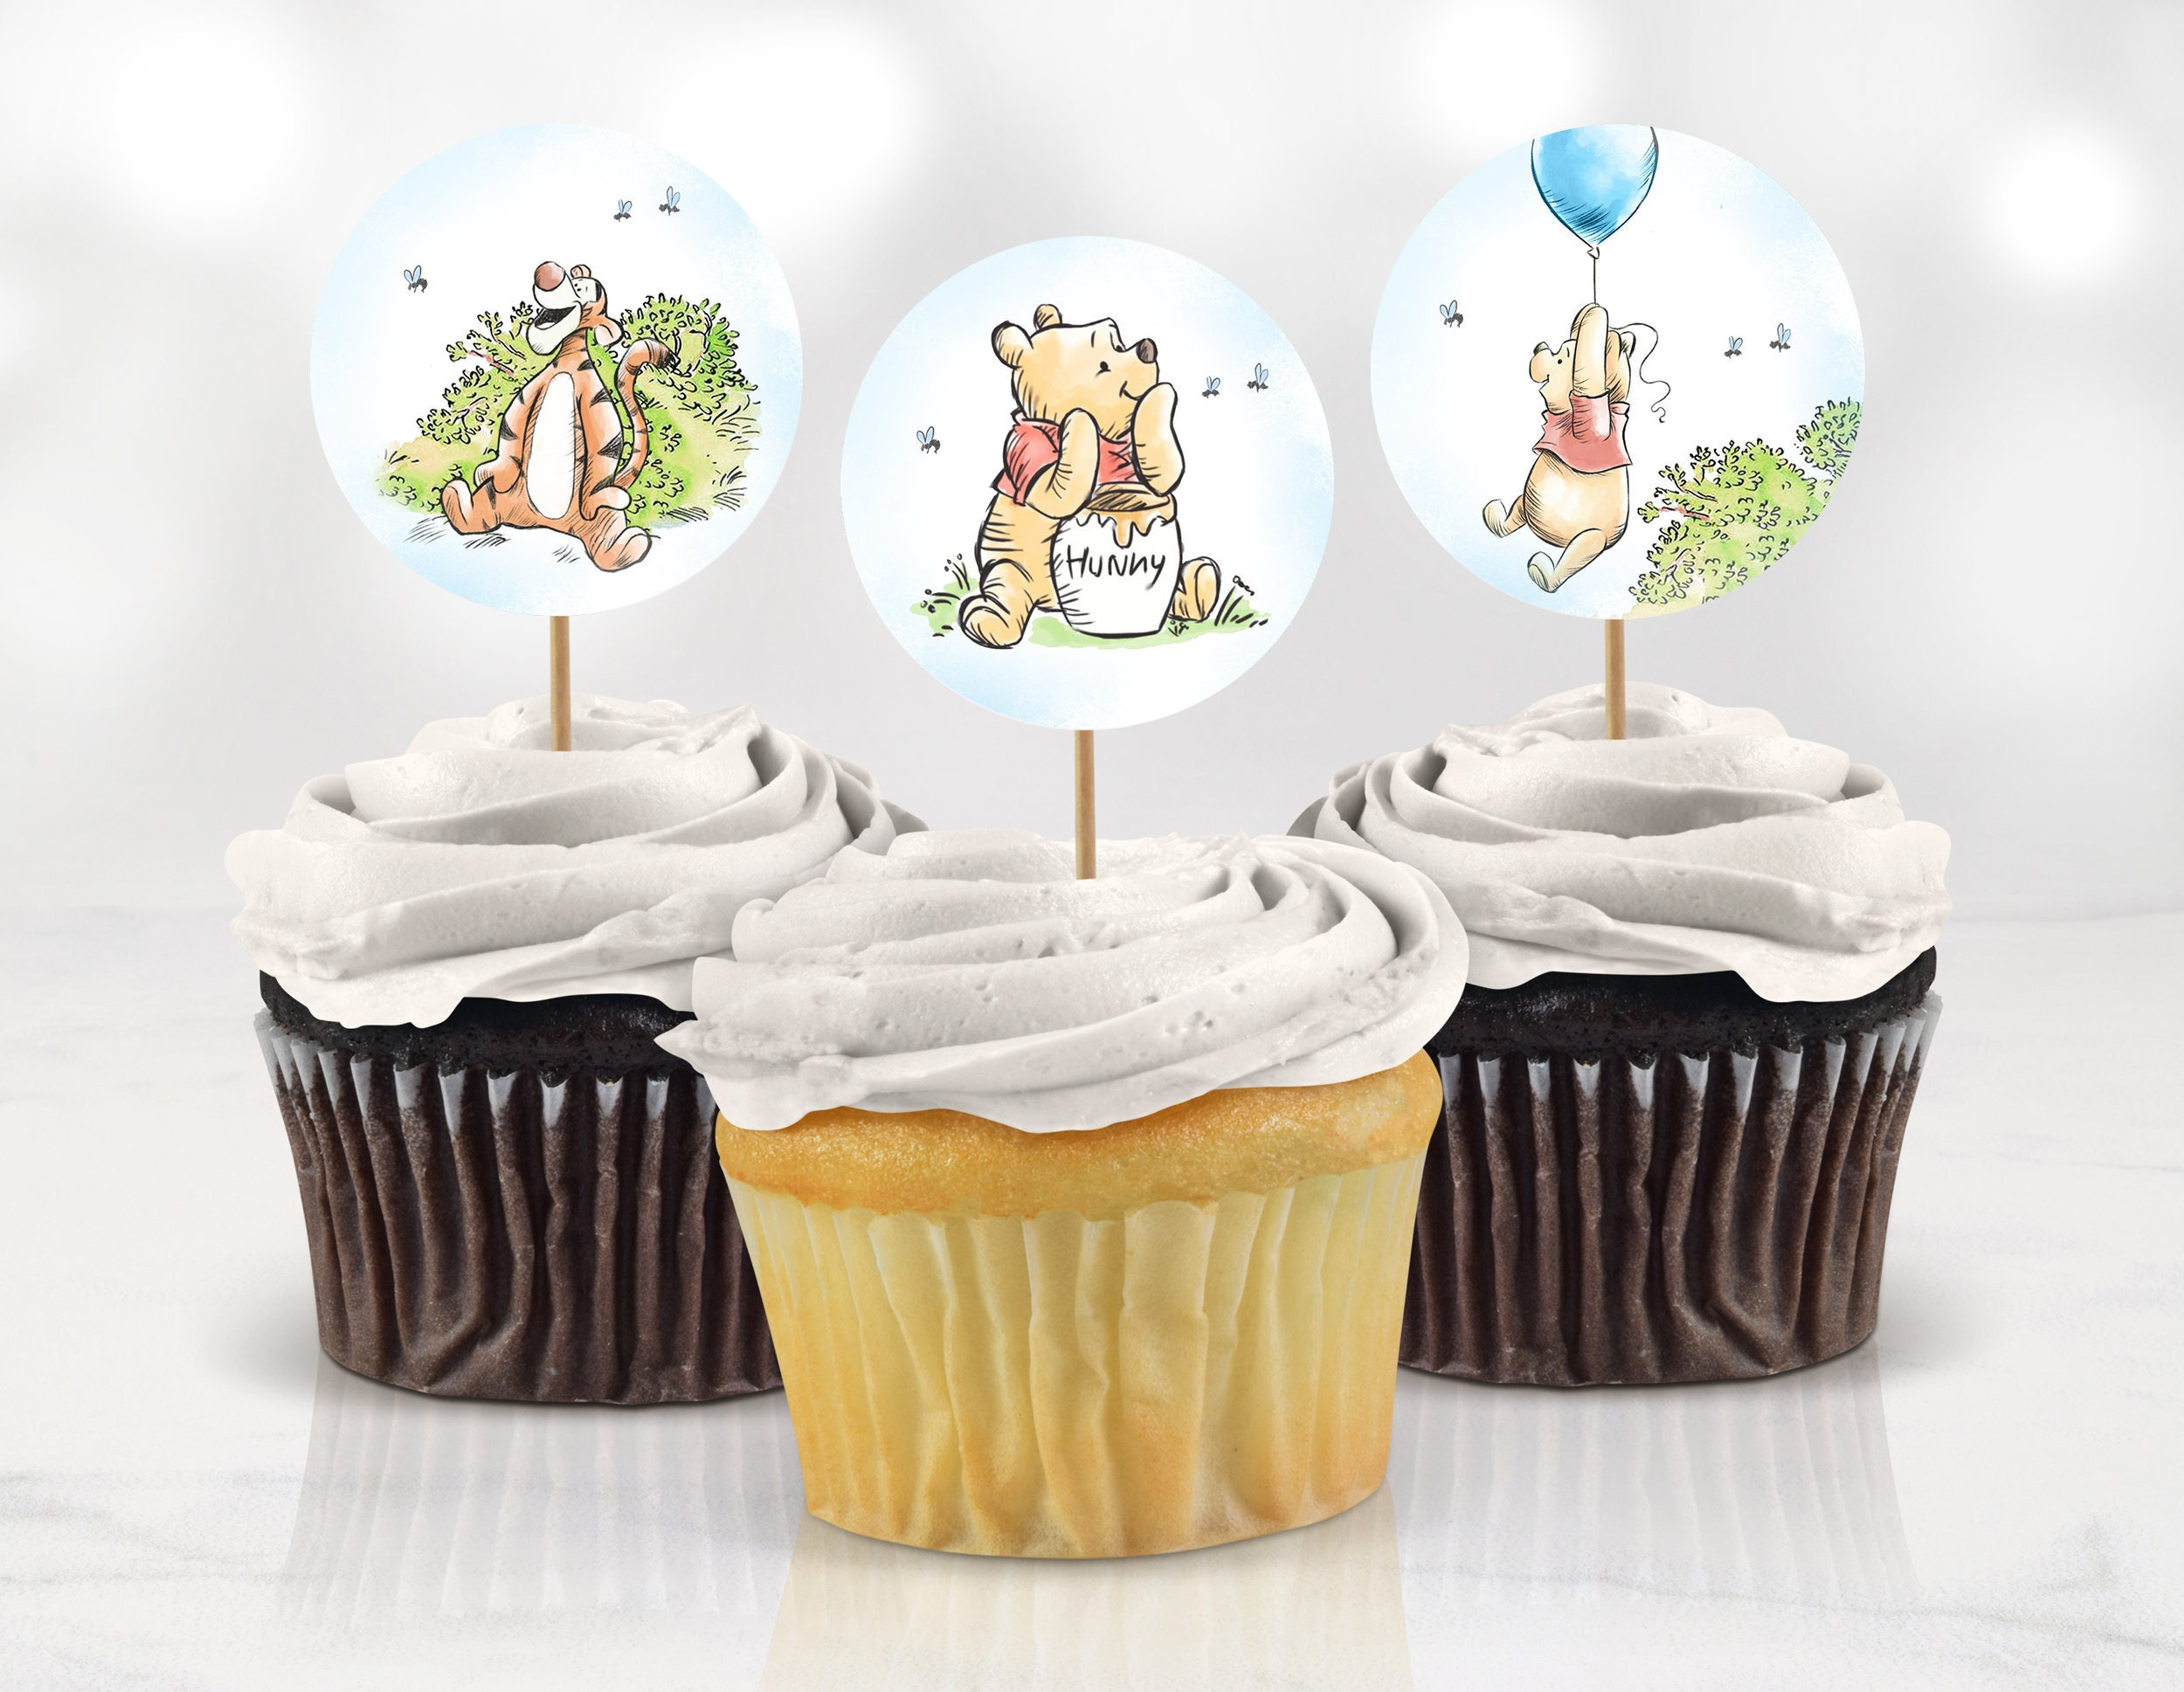 Classic Winnie the Pooh Baby Shower Edible Cupcake Topper – Cake Stuff to Go